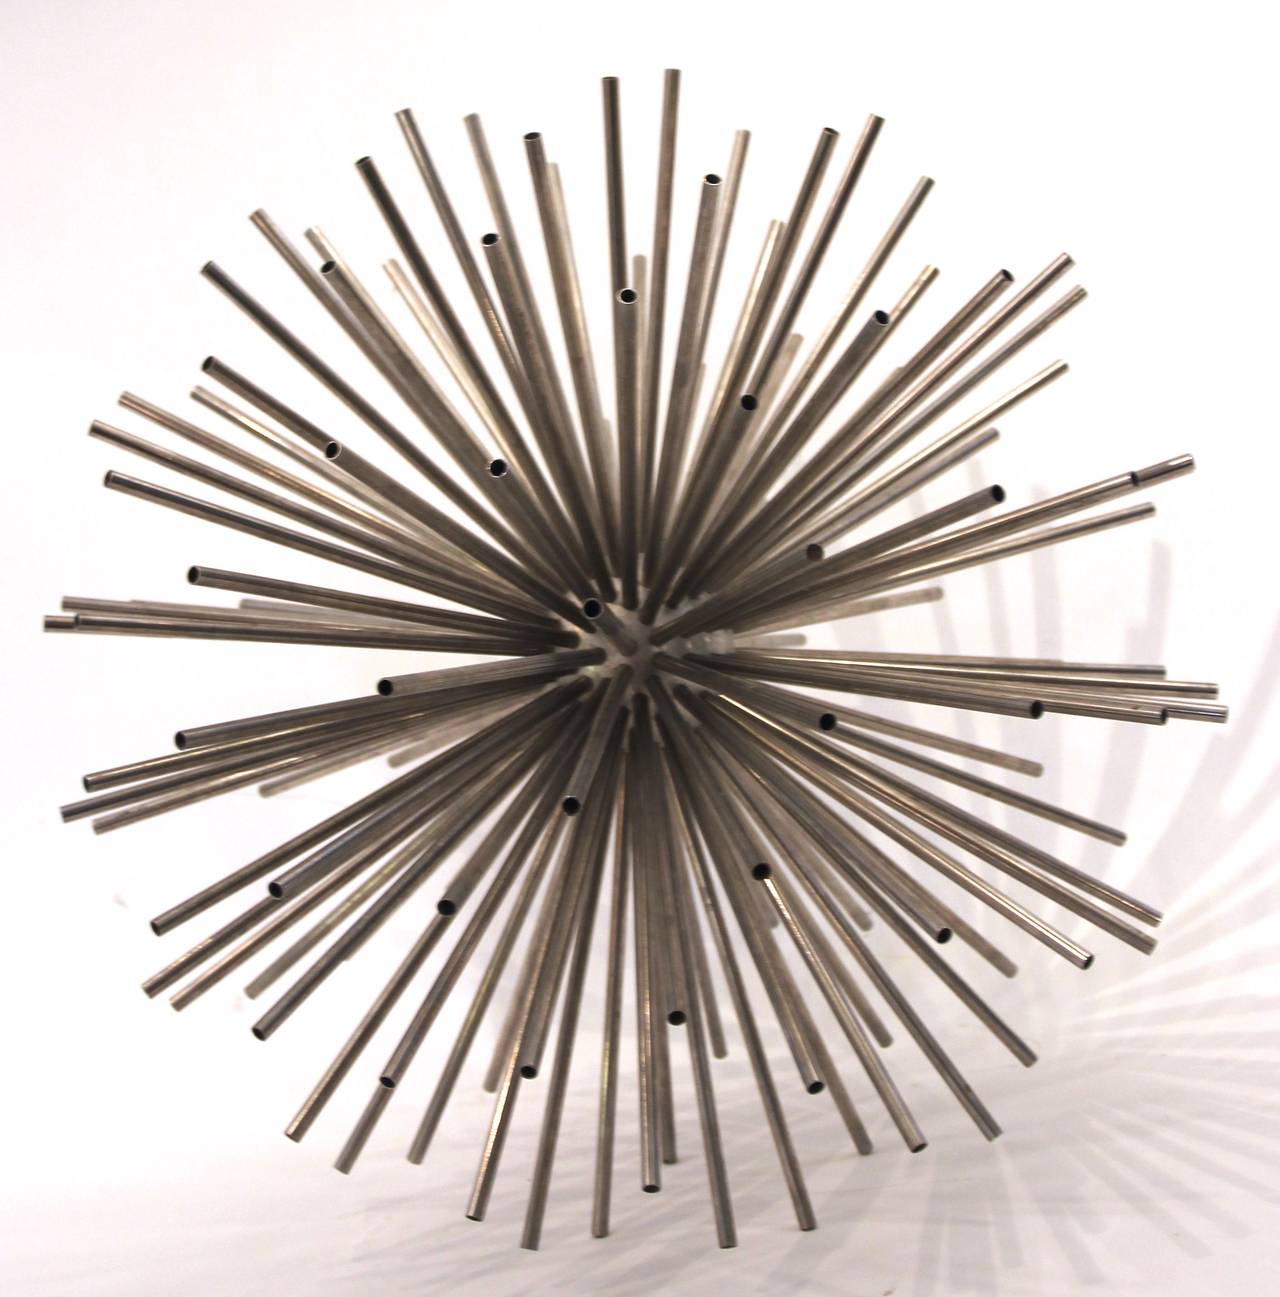 Curtis Jere,  Sputnik sculpture, 
chrome plate steel with steel tubes raditing in all directions,
circa 1970, USA.
Height: 70 cm, diameter: 65 cm.